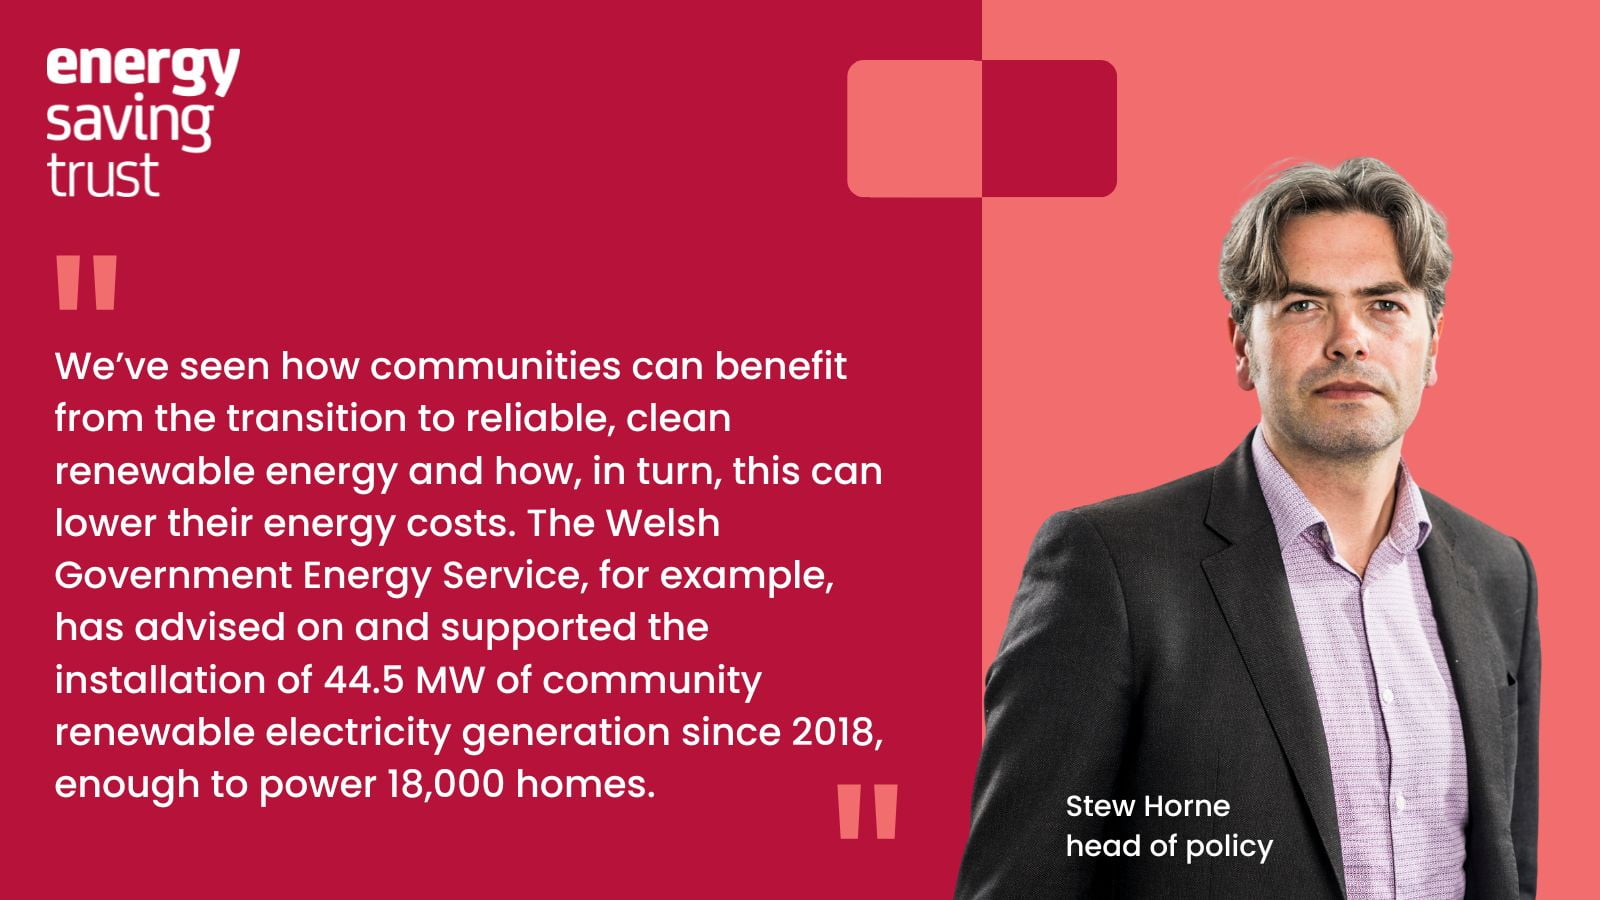 Quote from Stew Horne, Energy Saving Trust head of policy, on the GB Energy founding statement.